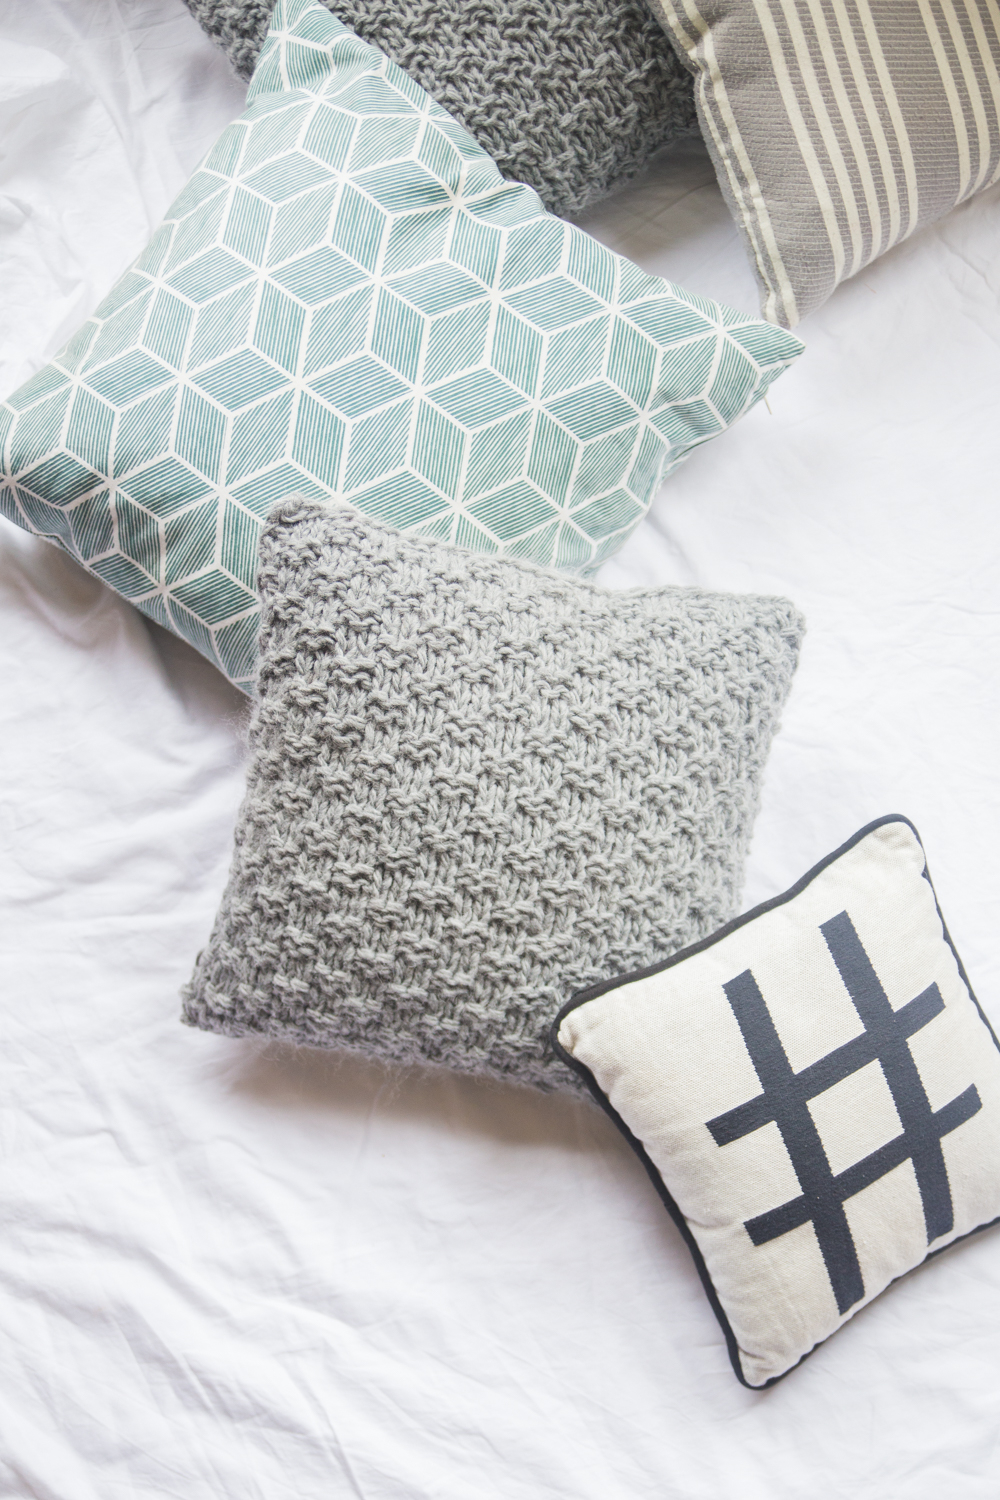 Knitting Patterns For Cushions Everyday Mindfulness Simple Knitted Cushion Diy I Want You To Know